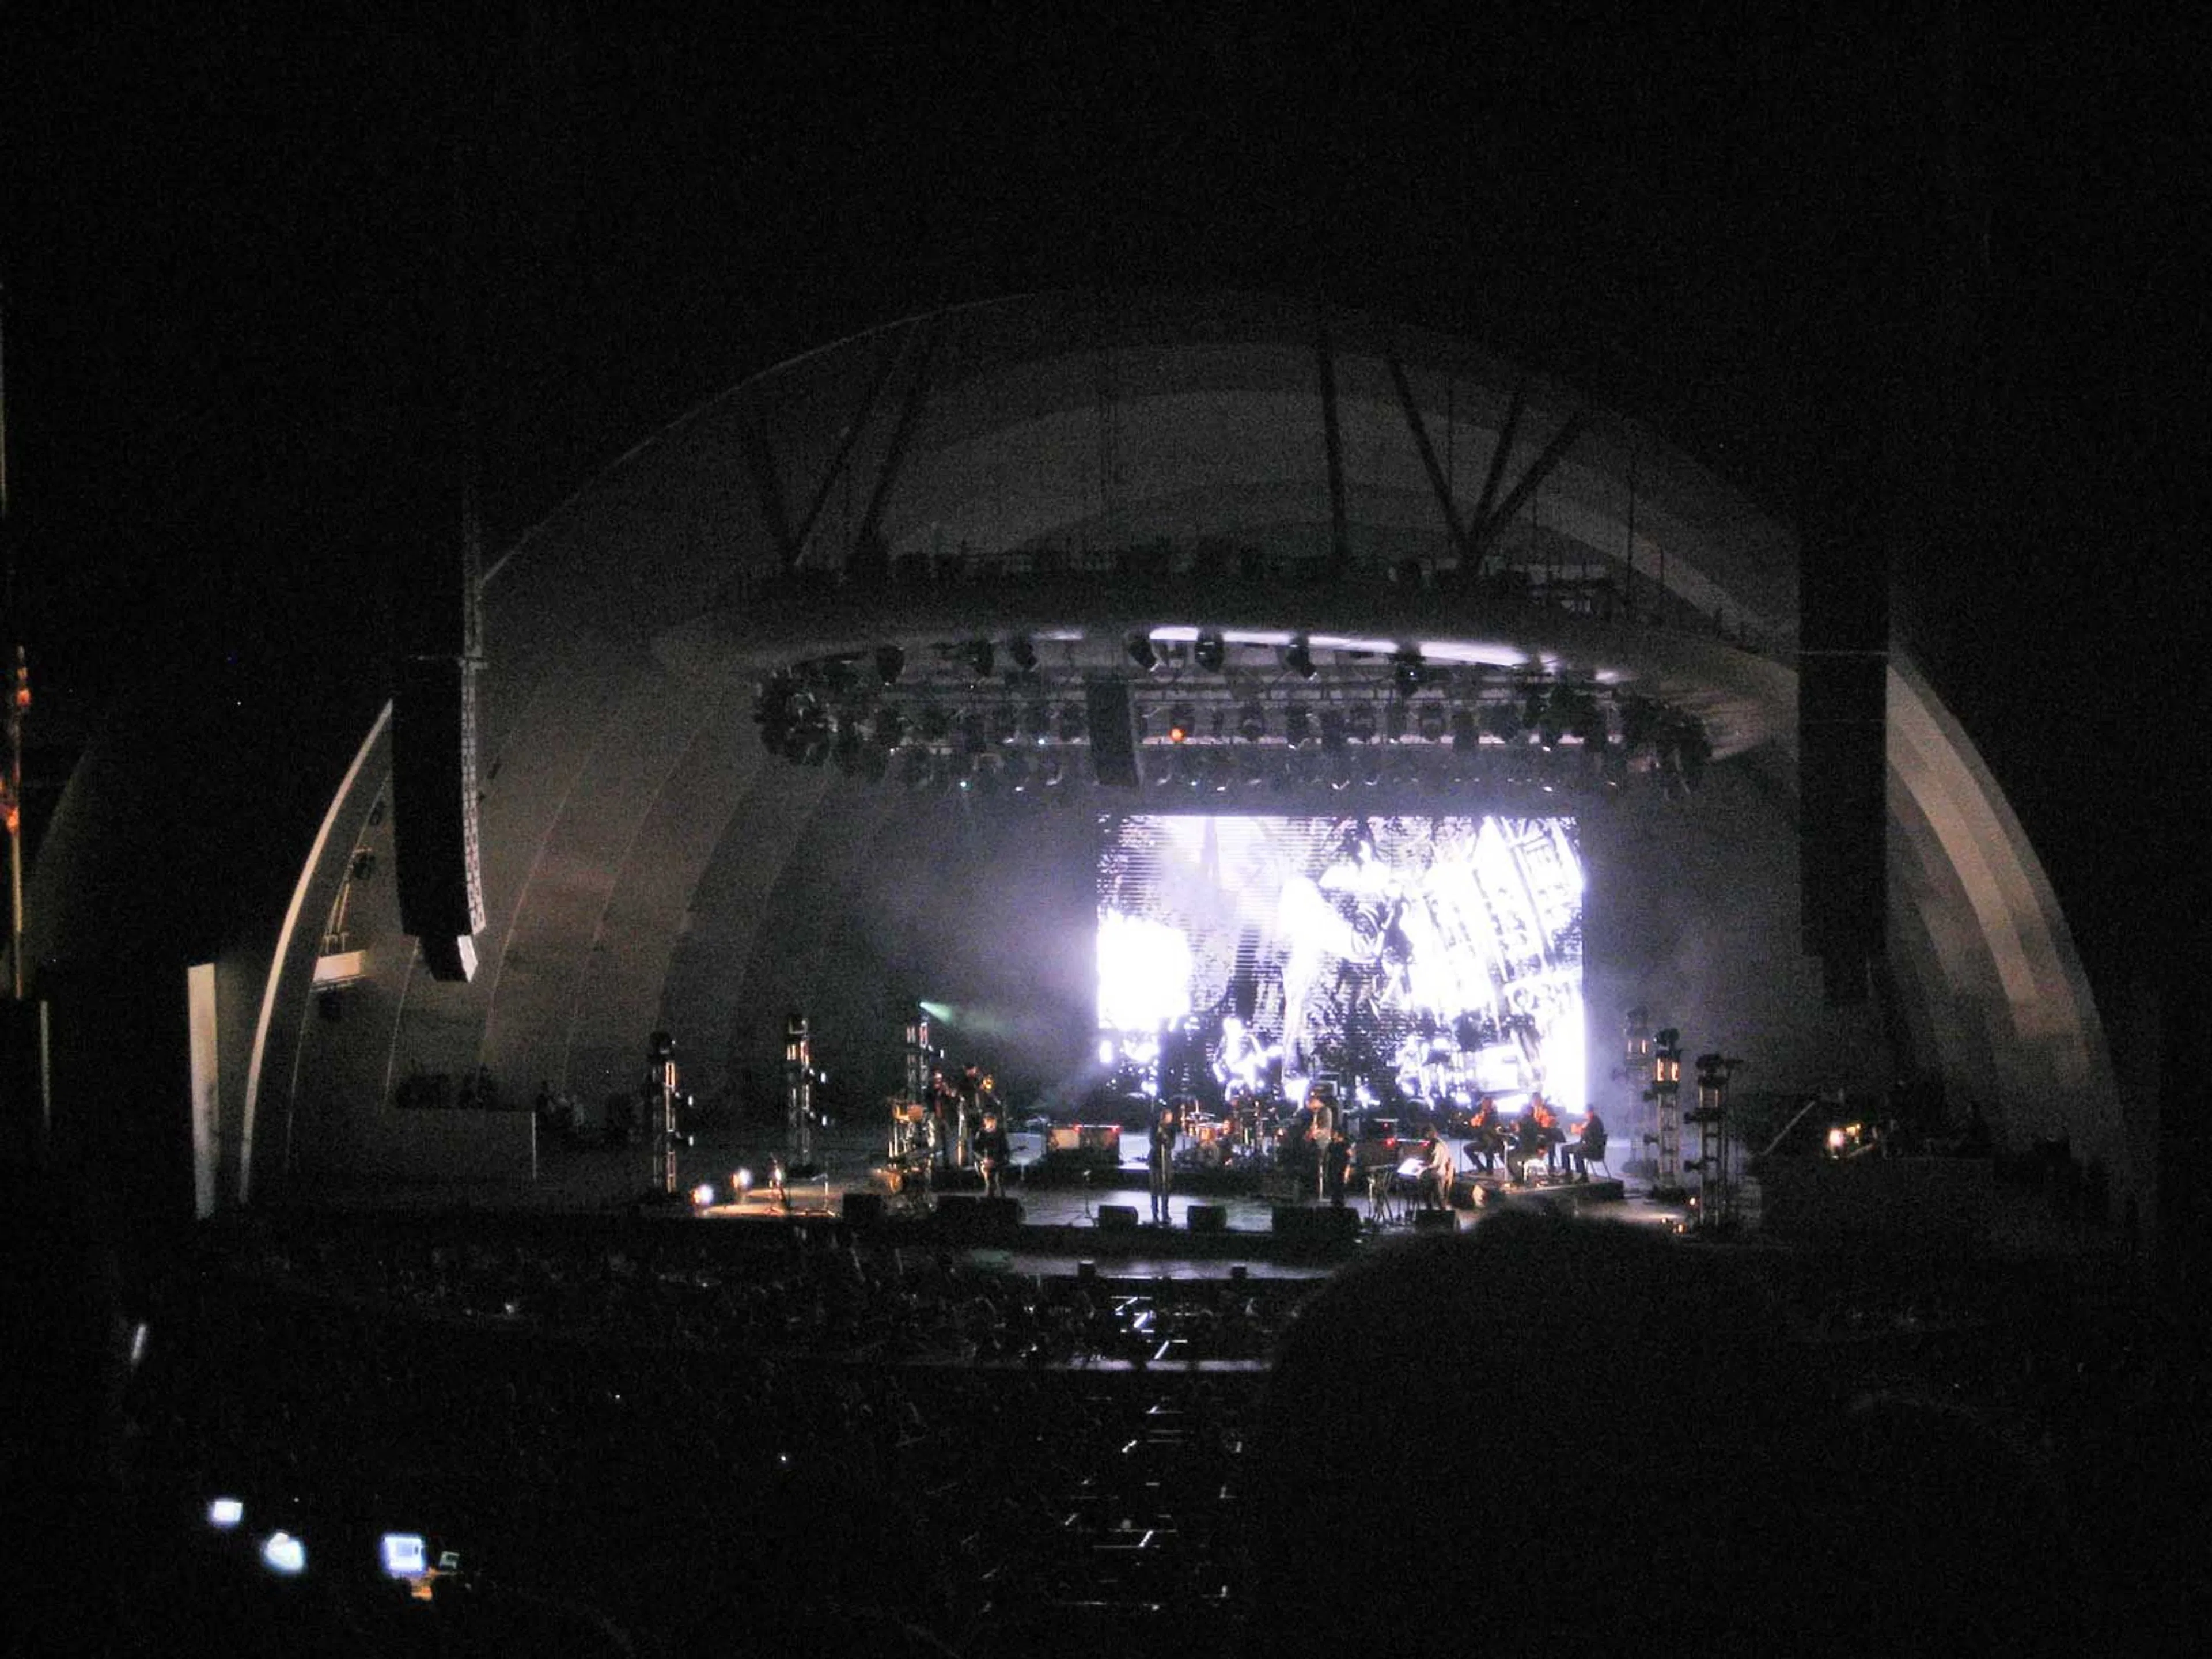 View from the "rafters" at the Hollywood Bowl in September, 2011